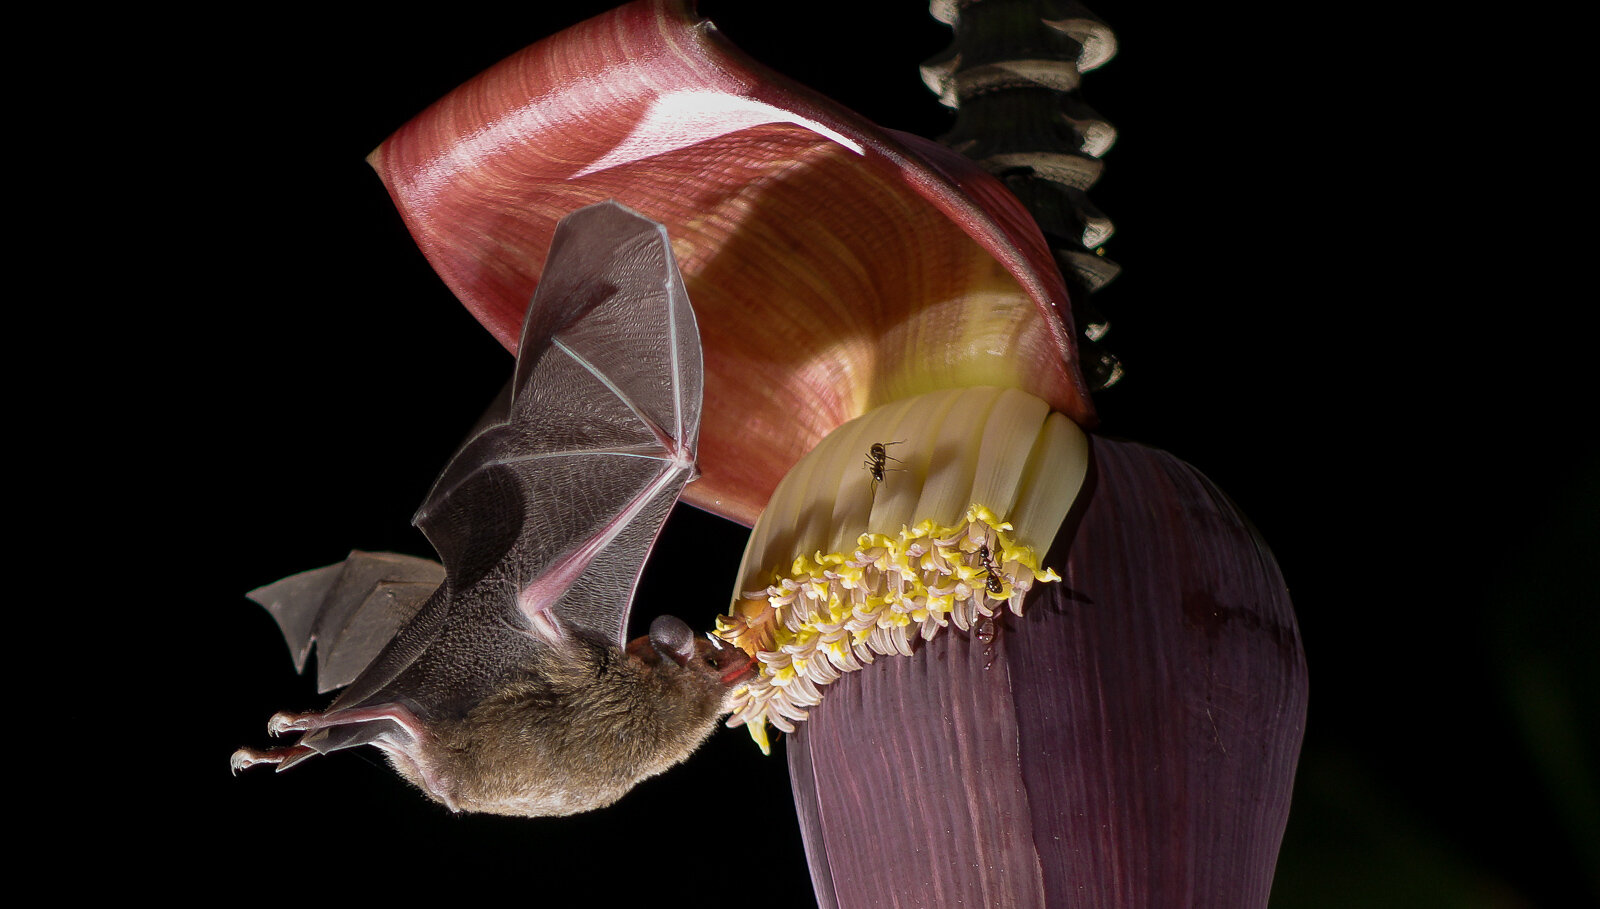 Bat guts become less healthy through diet of 'fast food' from banana plantations